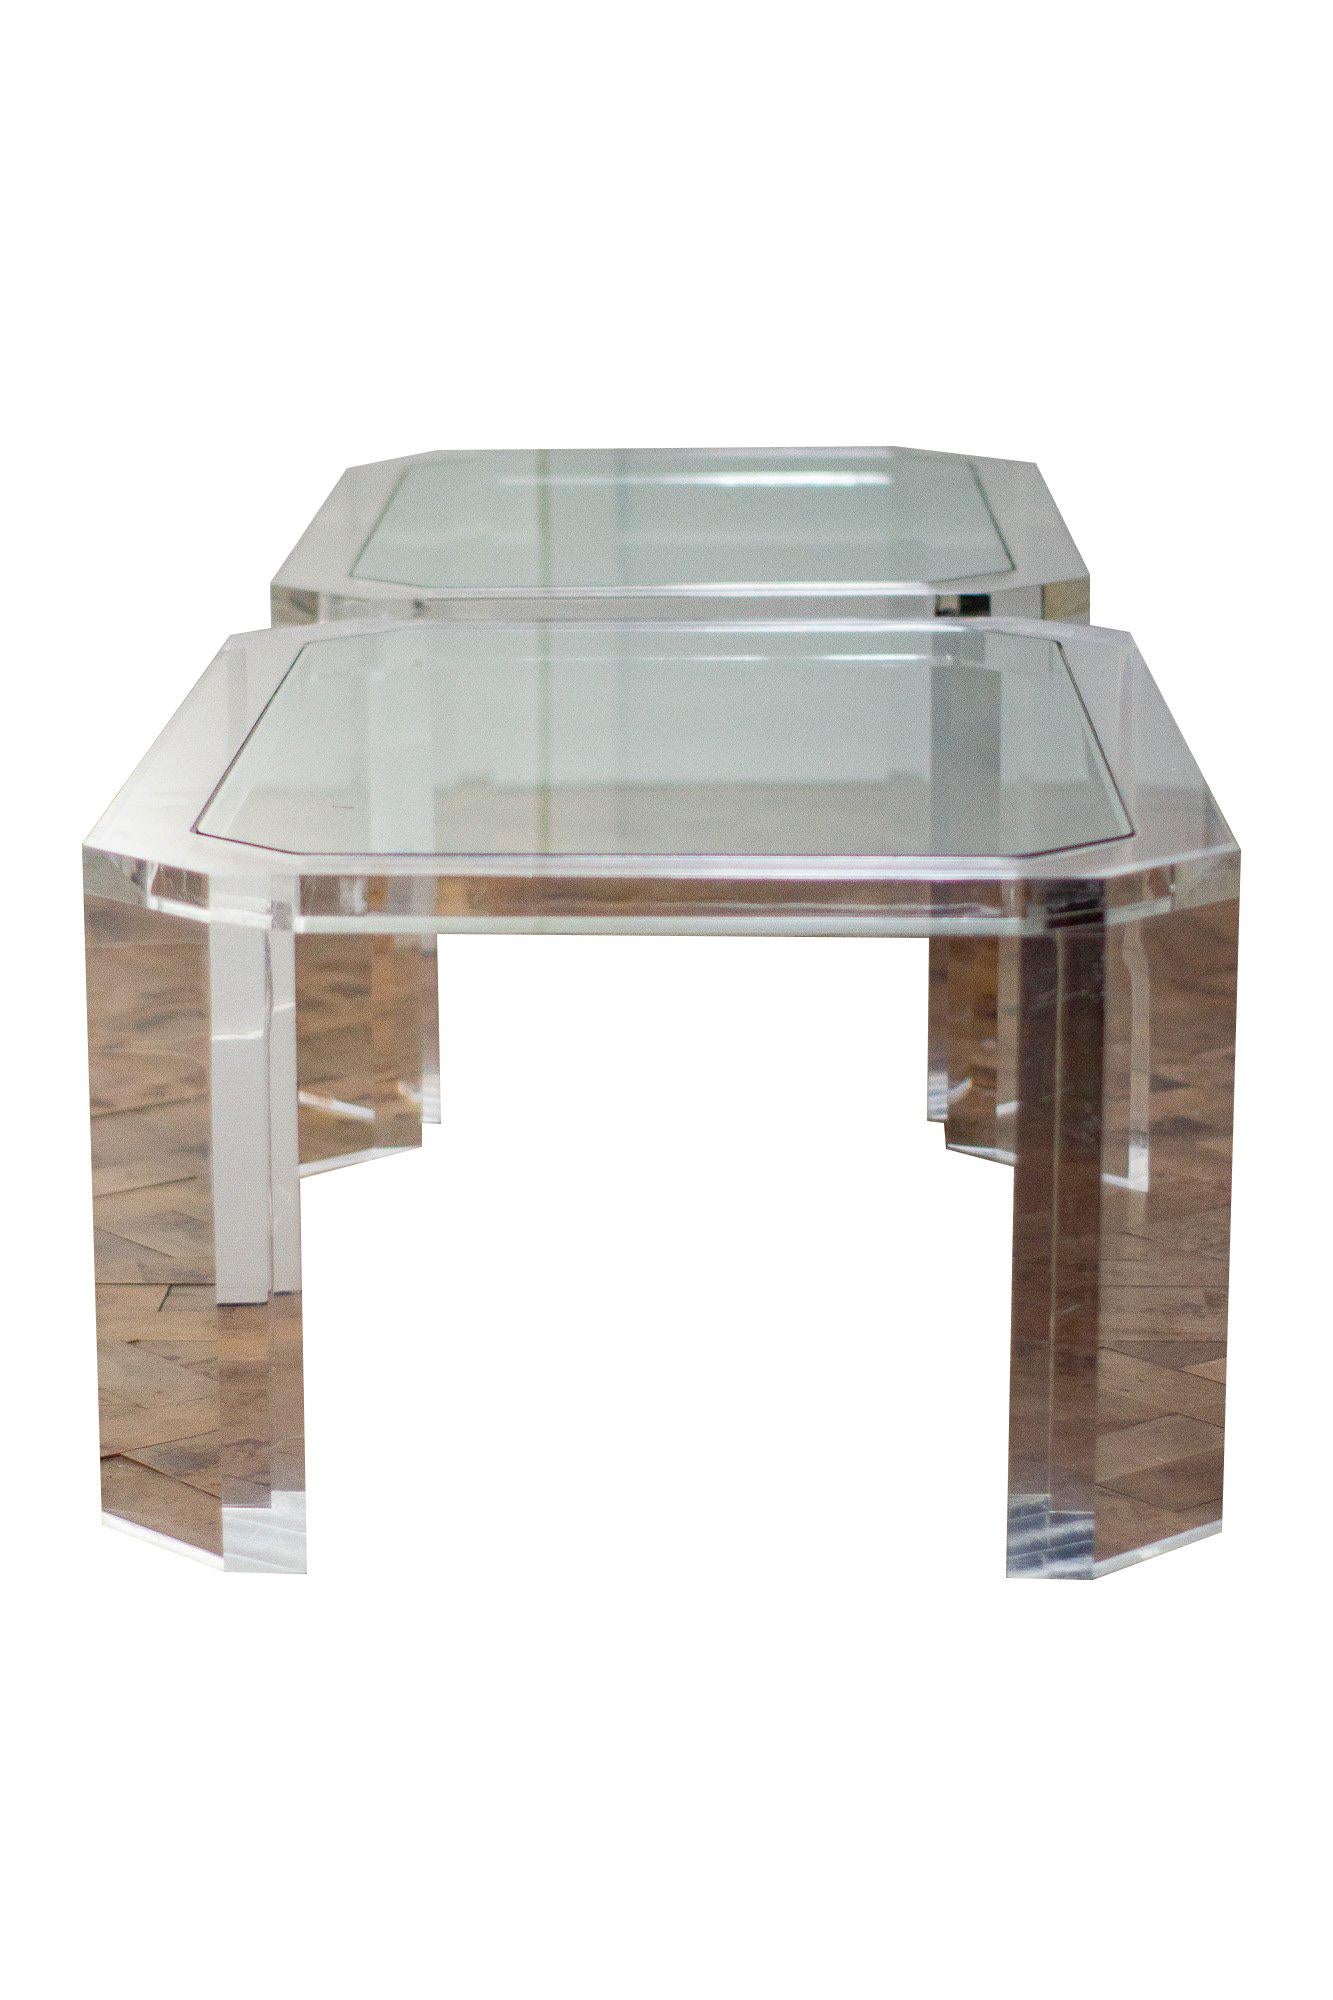 Pair of 1980s coffee tables made of clear Lucite with glass inset top. 

Aged related marks to glass and Lucite. 

Sold as a pair.